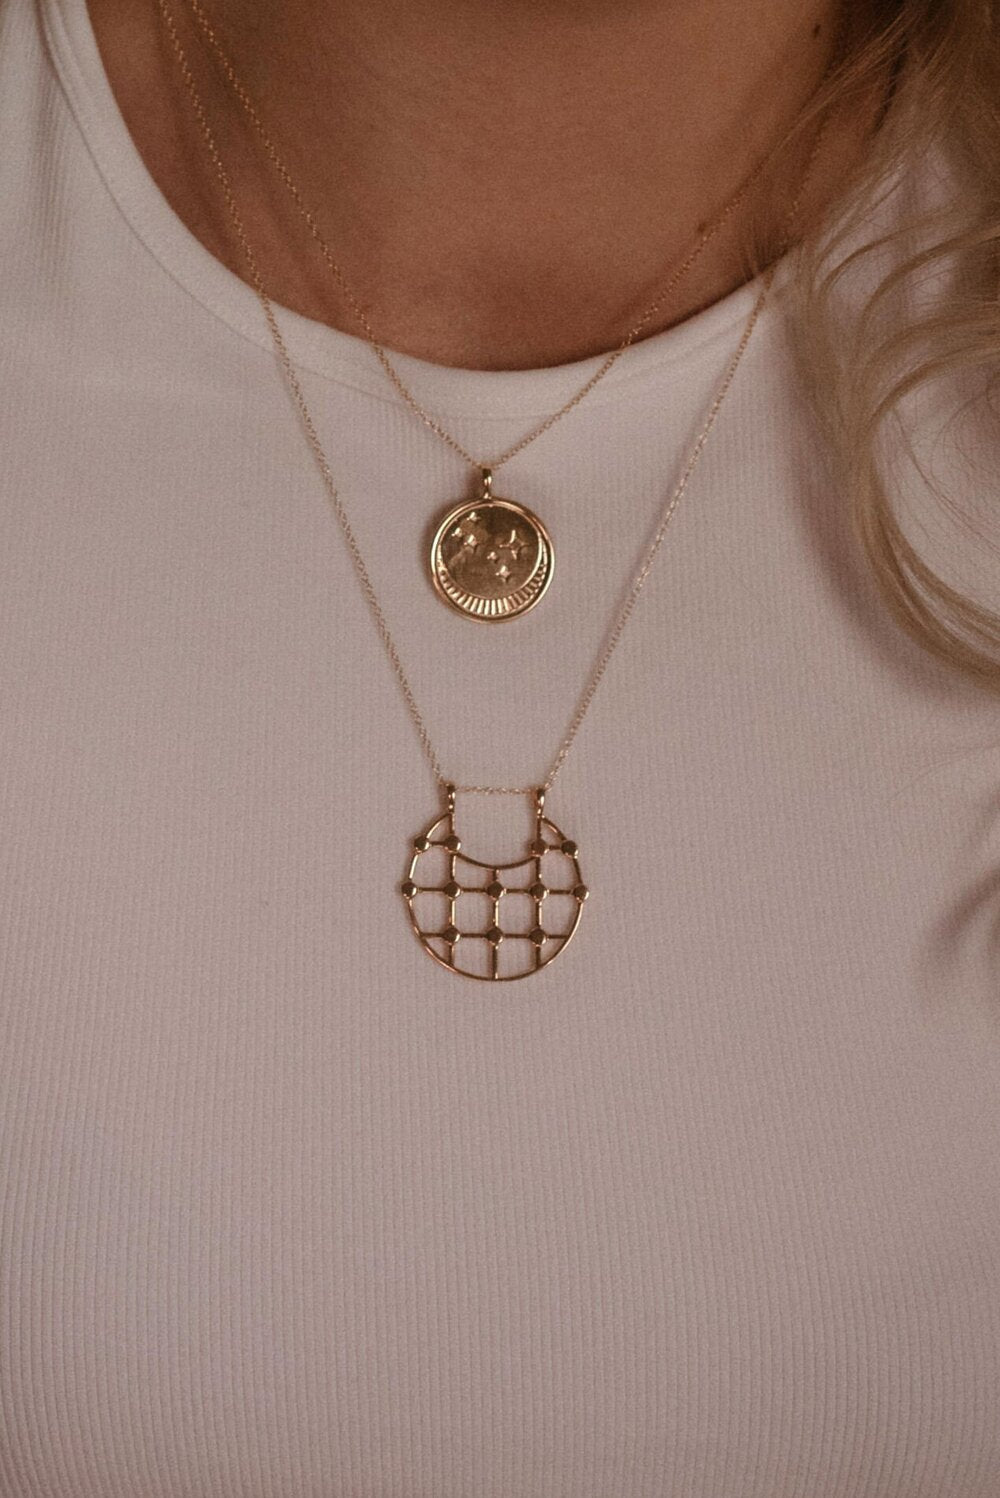 UNIKONCEPT Lifestyle boutique: image shows the Franz Necklace in gold rose quartz by Sarah Mulder. This necklace features a circular pendant engraved with a moon and star details as well as a small rose quartz stone. The pendant hangs from a delicate gold chain.